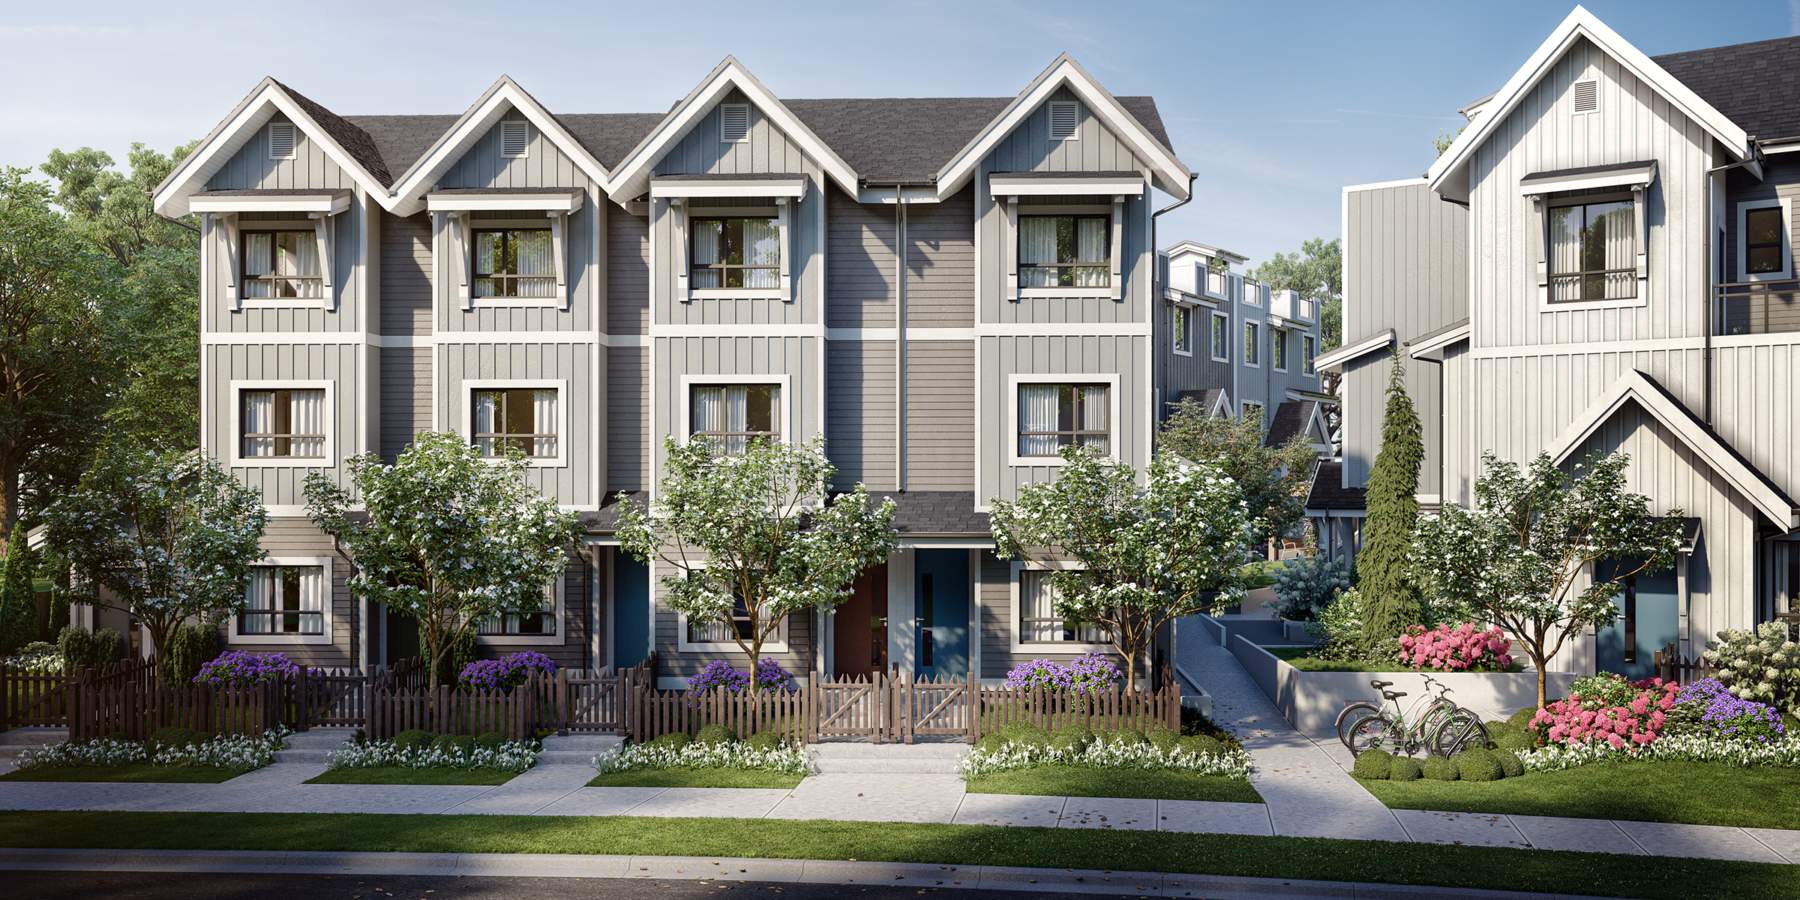 A collection of 23 Coquitlam townhomes in three 3-storey woodframe buildings.